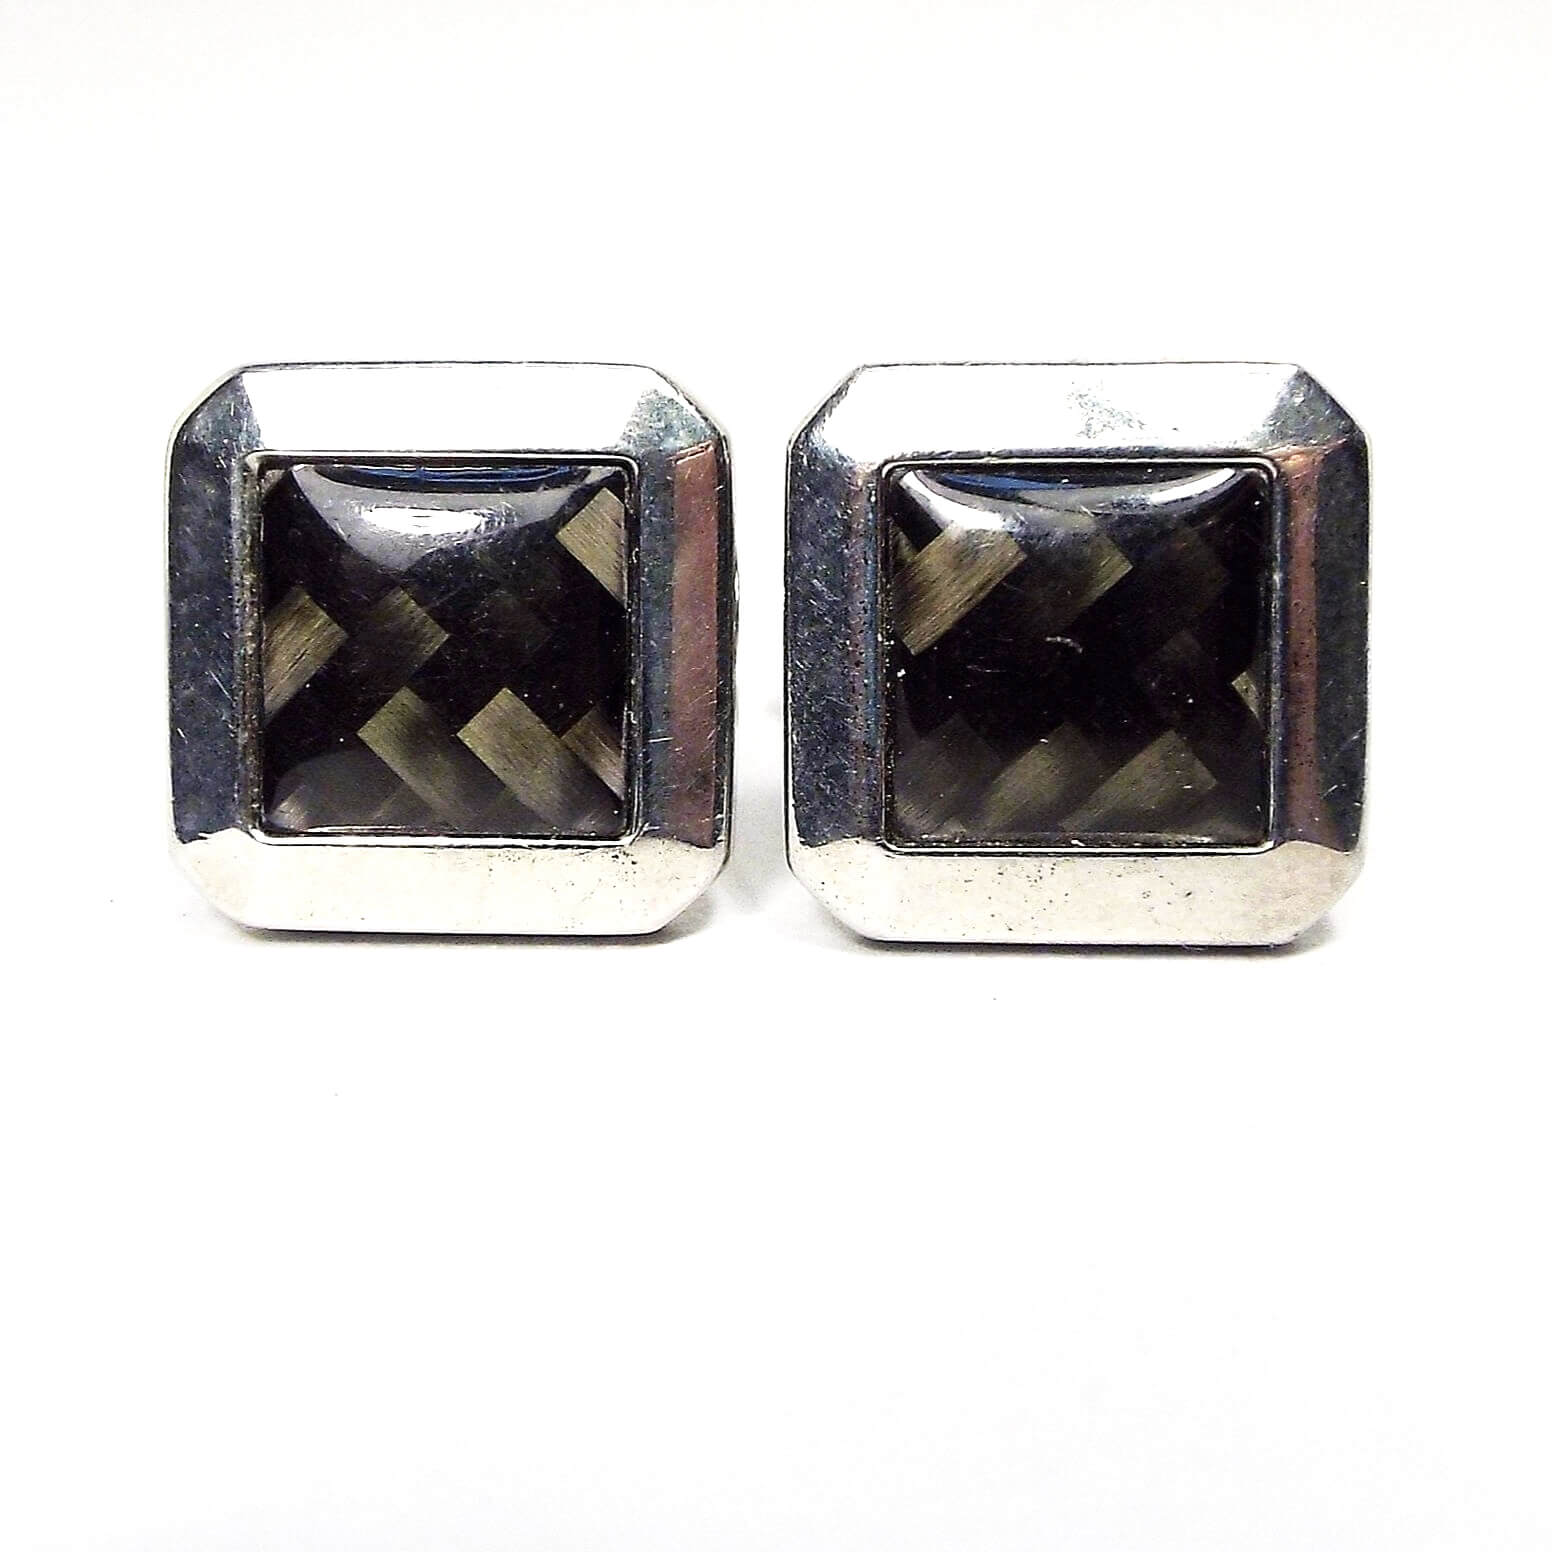 Cufflinks are octagon in shape that look like squares with angled corners. They are silver in color. Middle of cufflinks have a basket weave design in shades of brown and gray with a rounded clear resin top. 